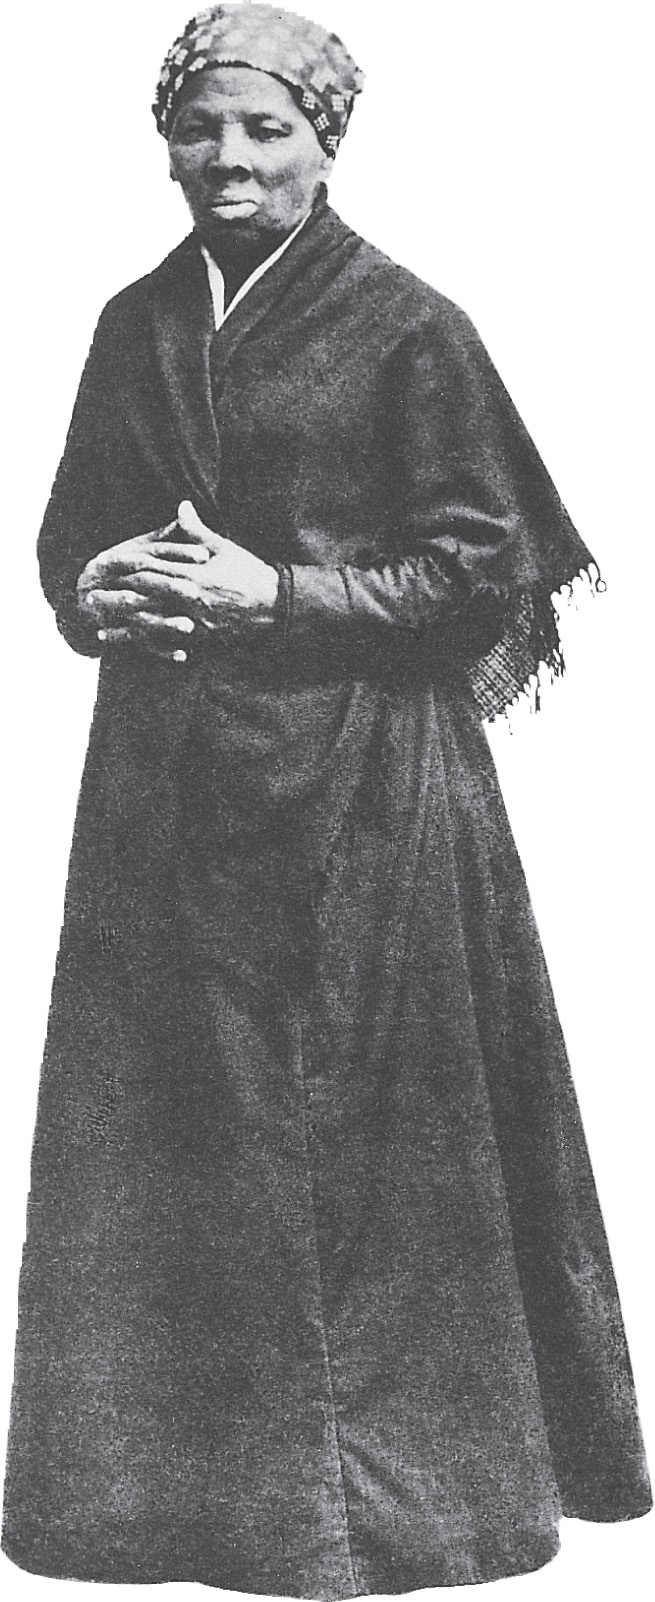 A photo of Harriet Tubman.